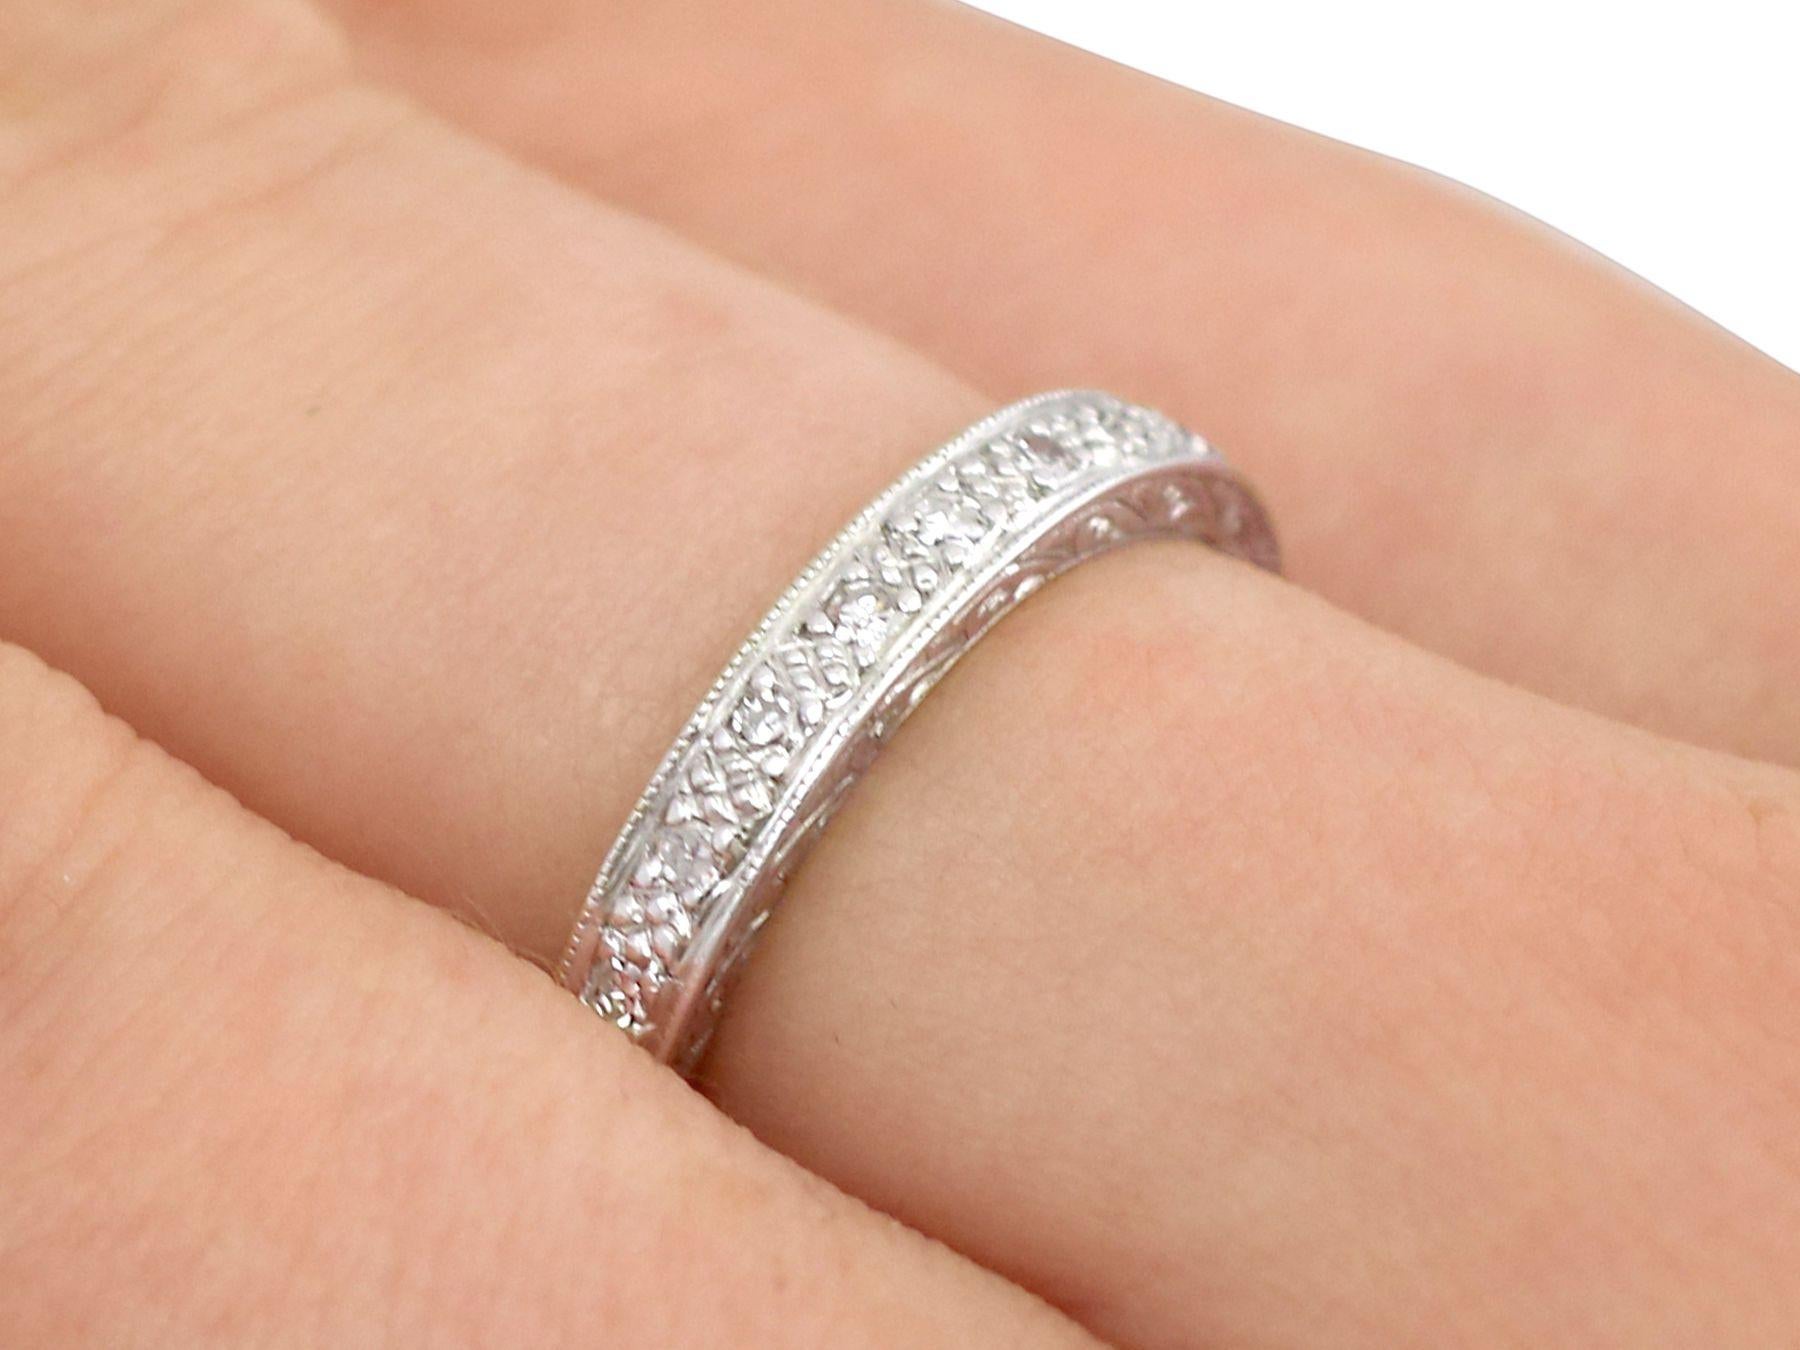 Vintage 1950s Diamond and Platinum Full Eternity Ring In Excellent Condition For Sale In Jesmond, Newcastle Upon Tyne